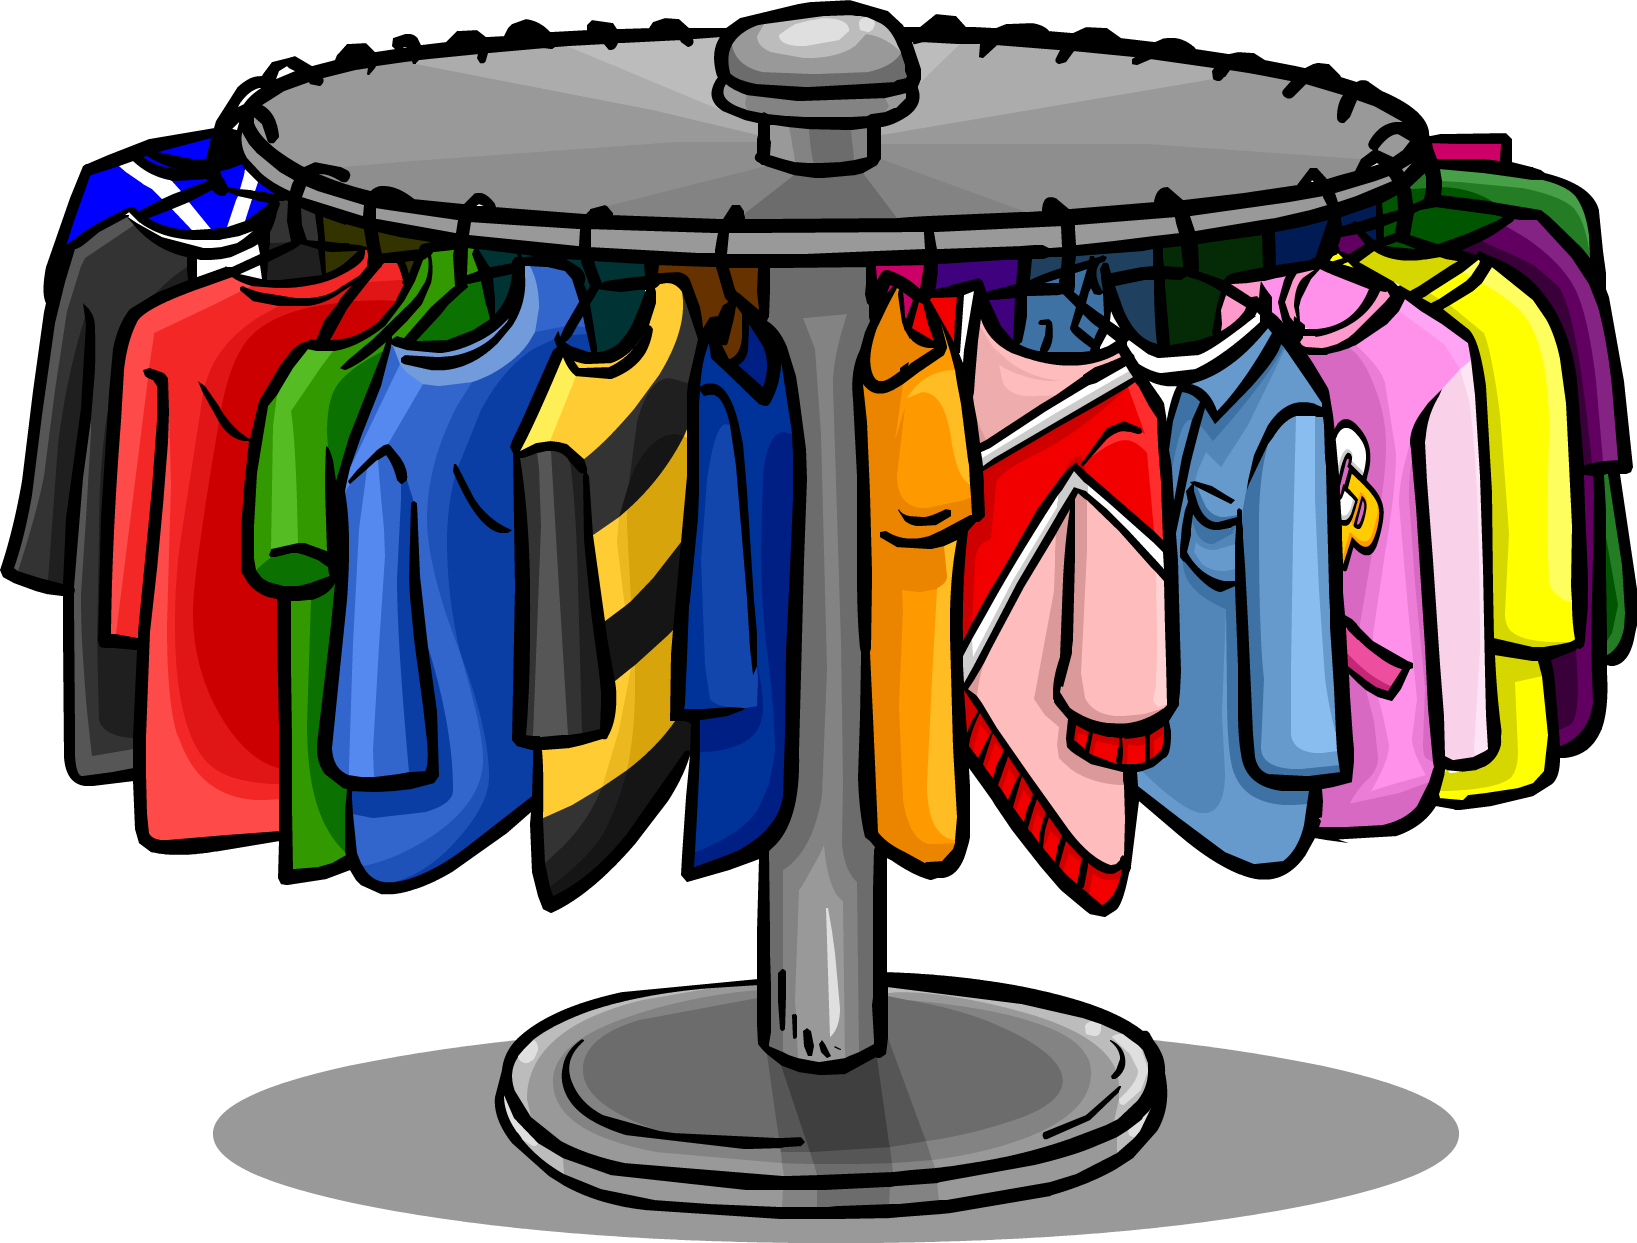 Pile of clothes clipart clipart images gallery for free.